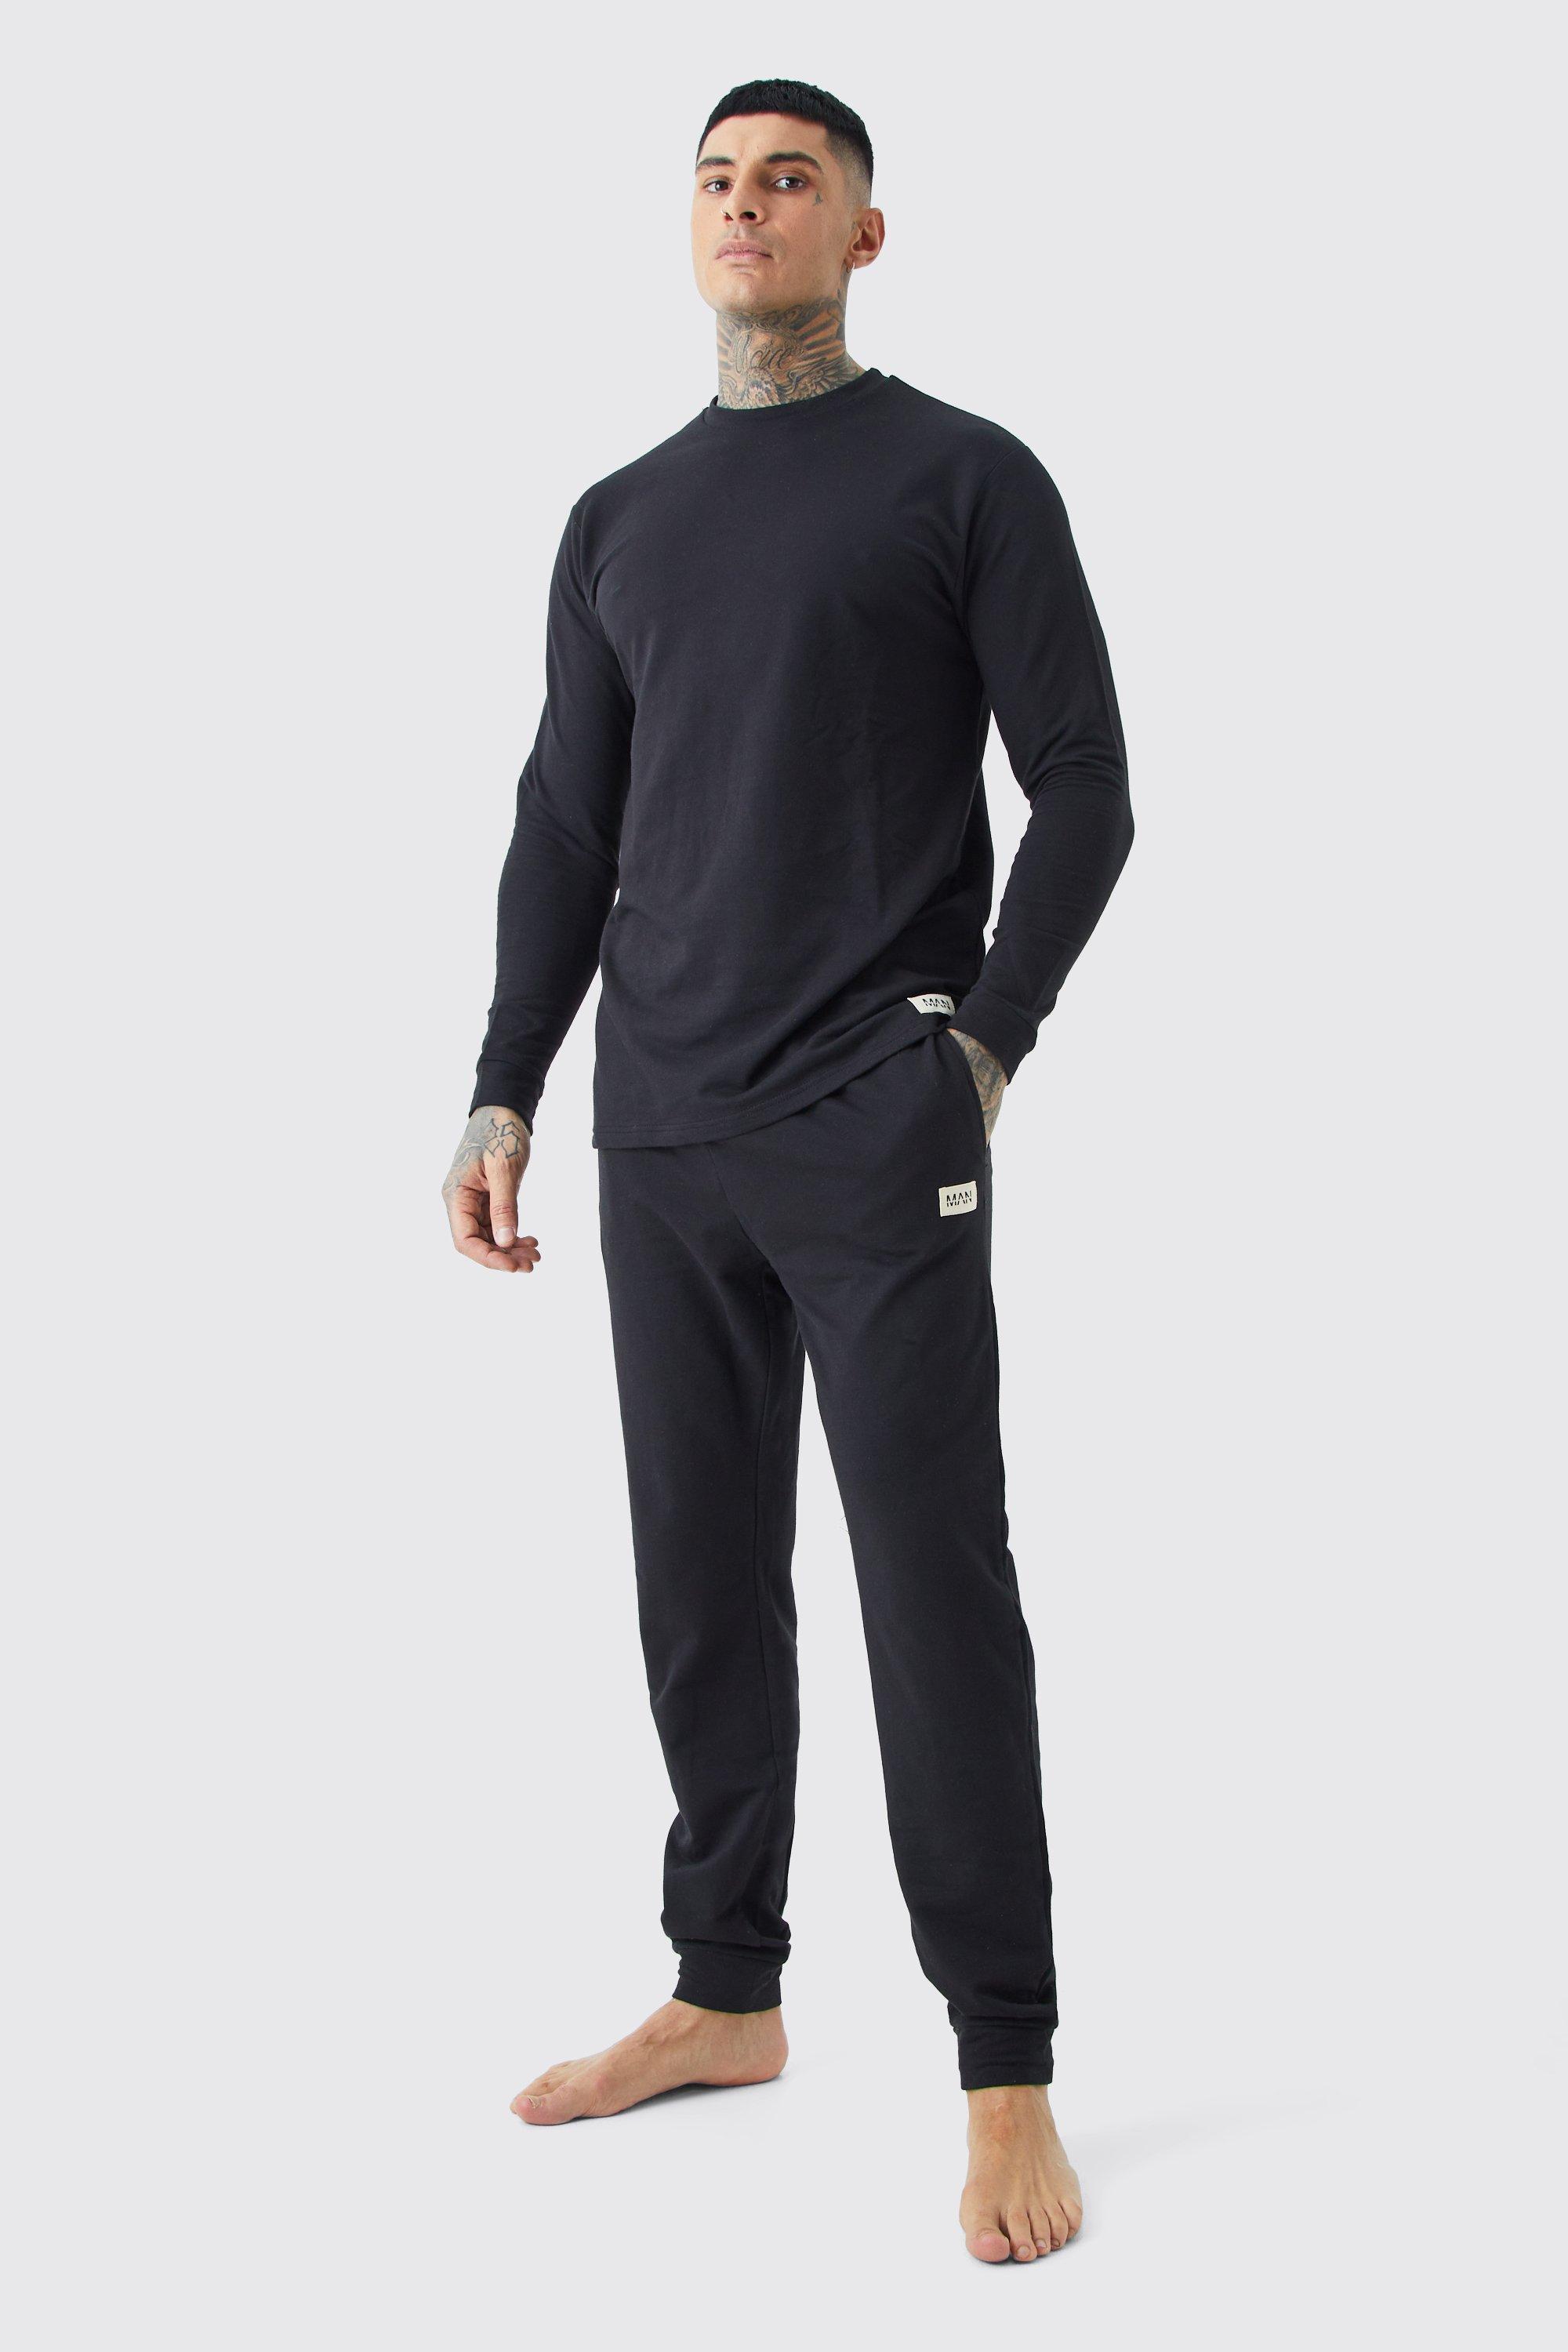 men's tall soft feel lounge top and jogger set - black - s, black